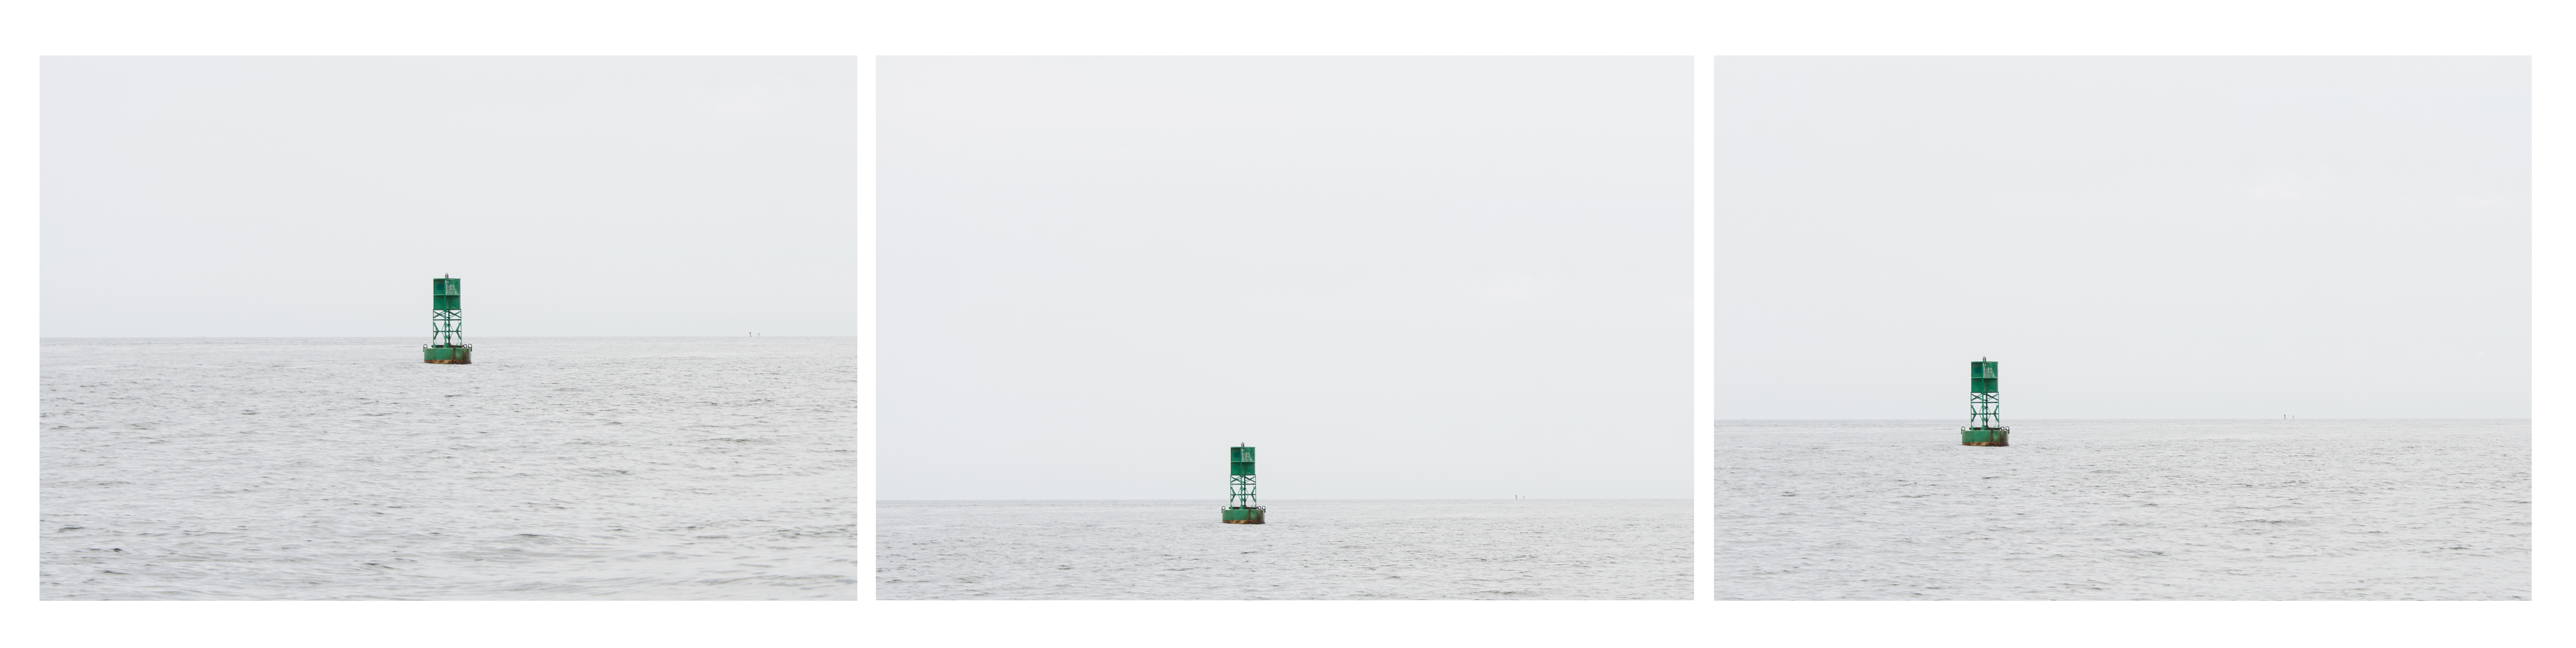 buoy off the coast of portland, maine, used to illustrate the rule of thirds, photographed by jamie bannon photography.